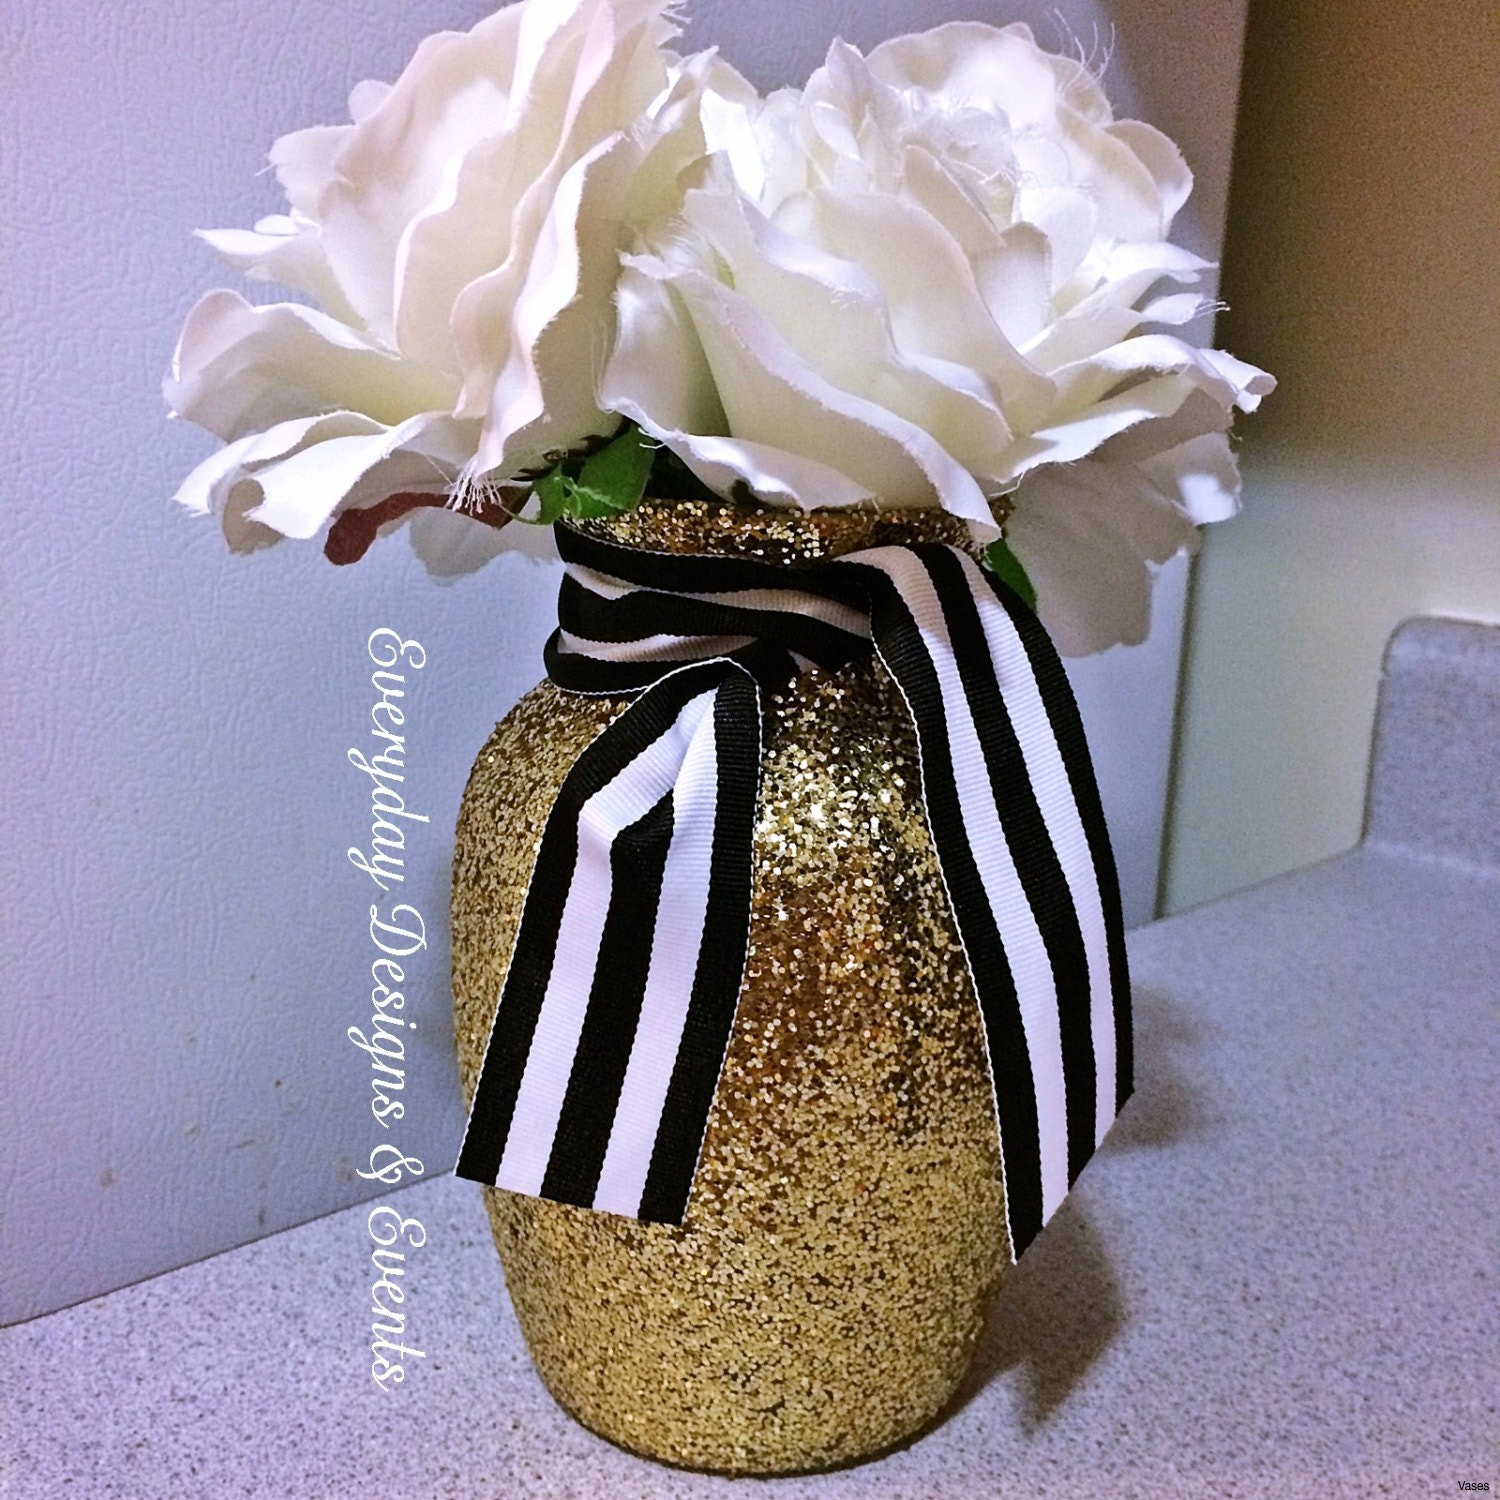 flower and vase centerpieces of black baby shower vases baby shower flower tutu vase centerpiece for for black baby shower vases baby shower flower tutu vase centerpiece for a i 0d